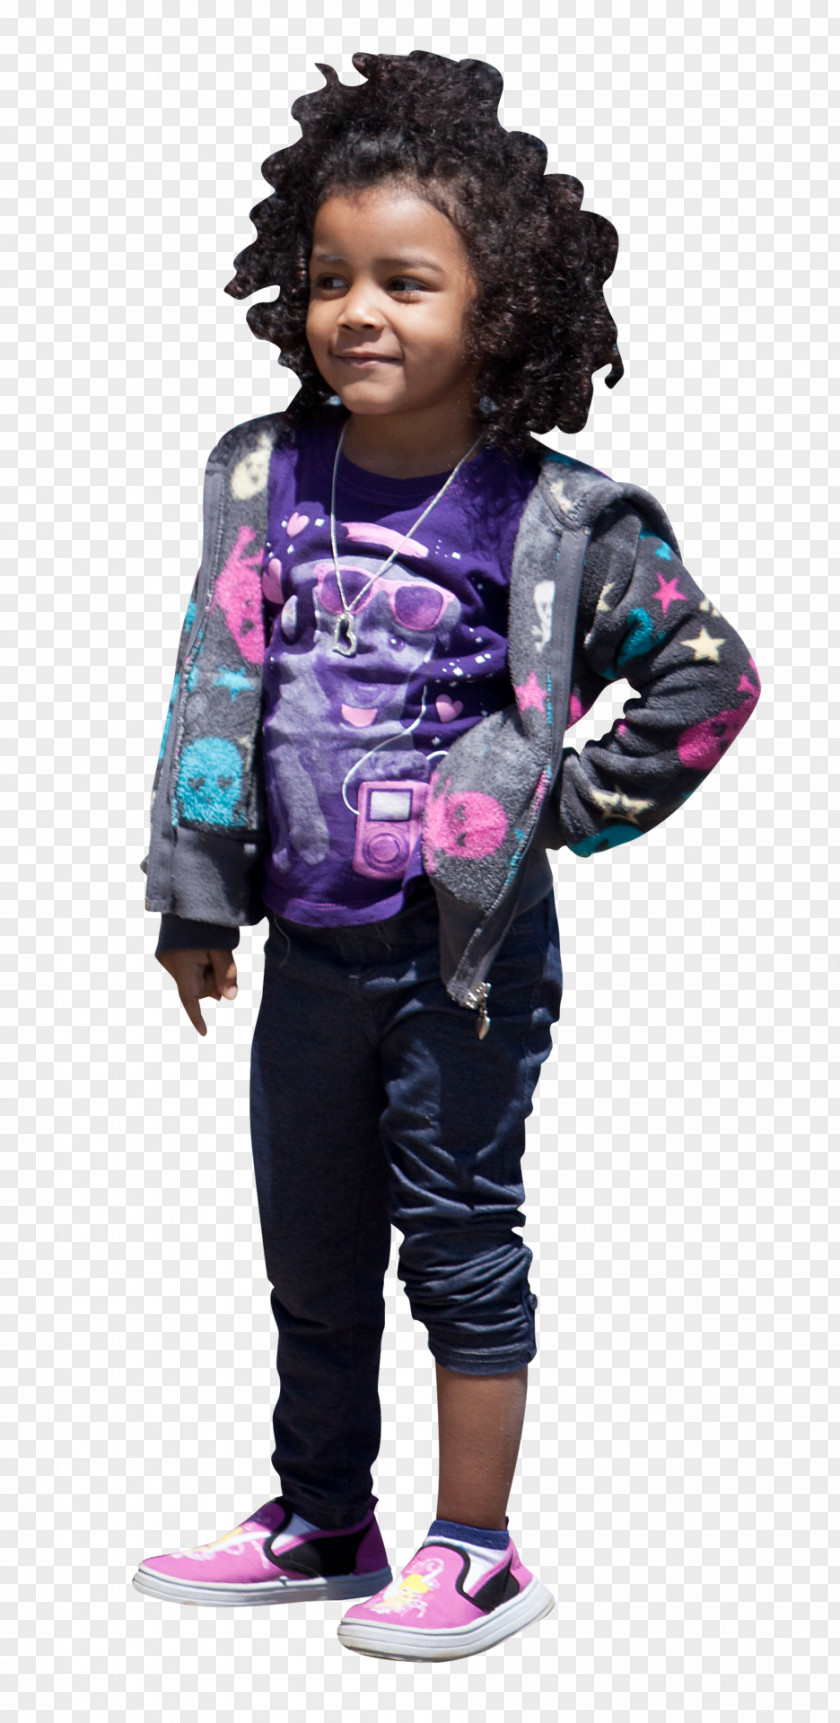 Kids Sitting Toddler Child Entourage Outerwear Creative Commons License PNG